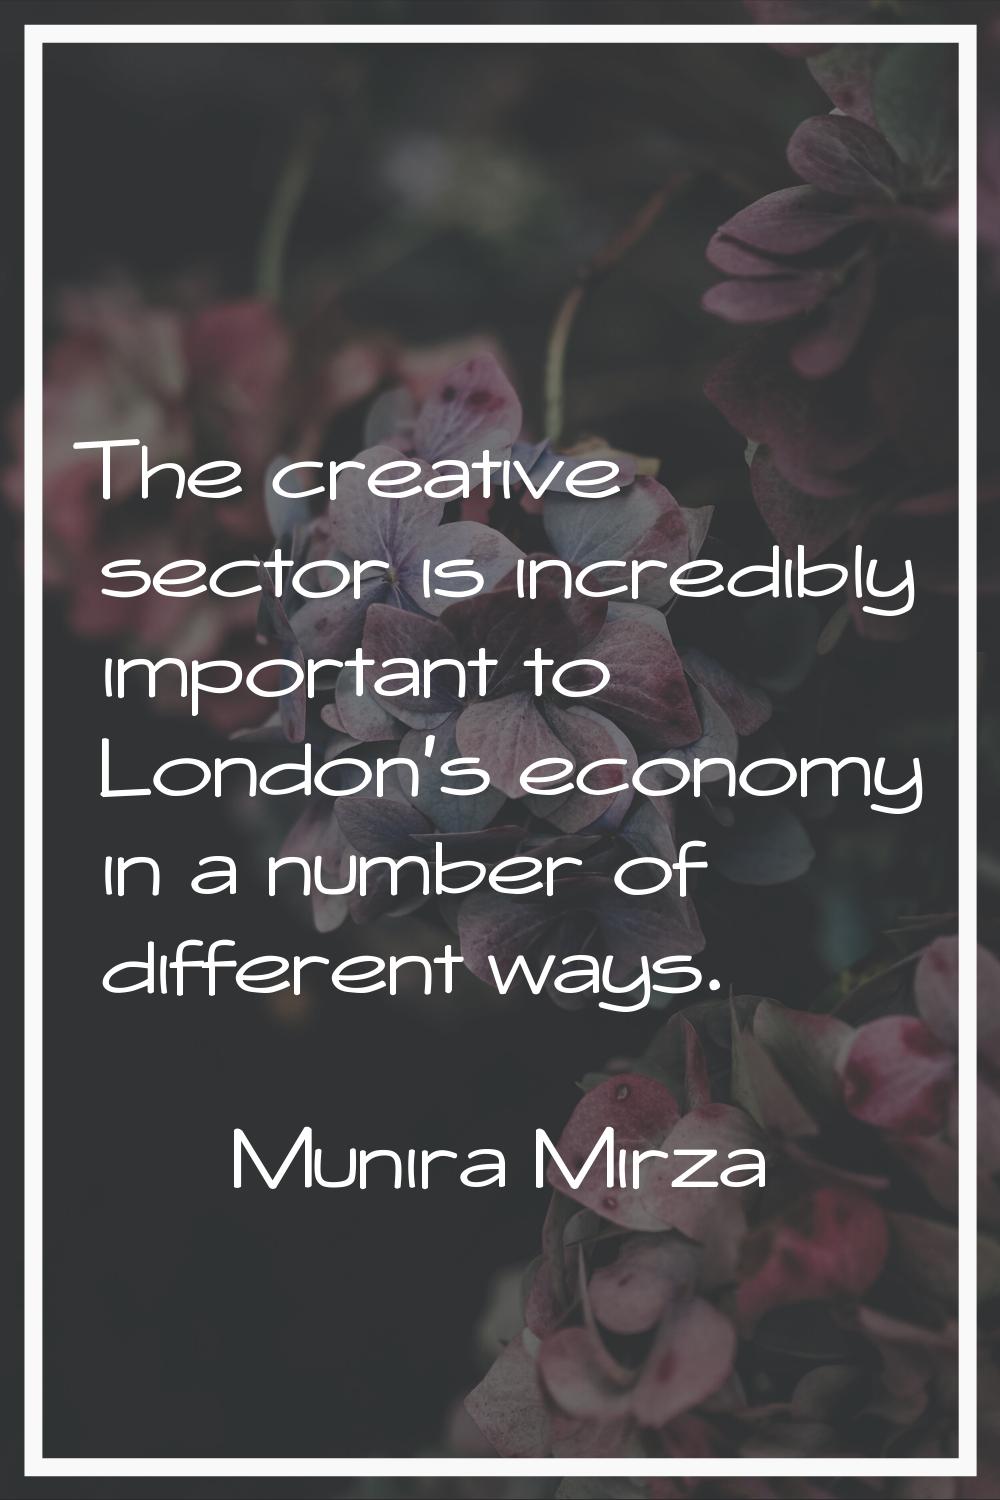 The creative sector is incredibly important to London's economy in a number of different ways.